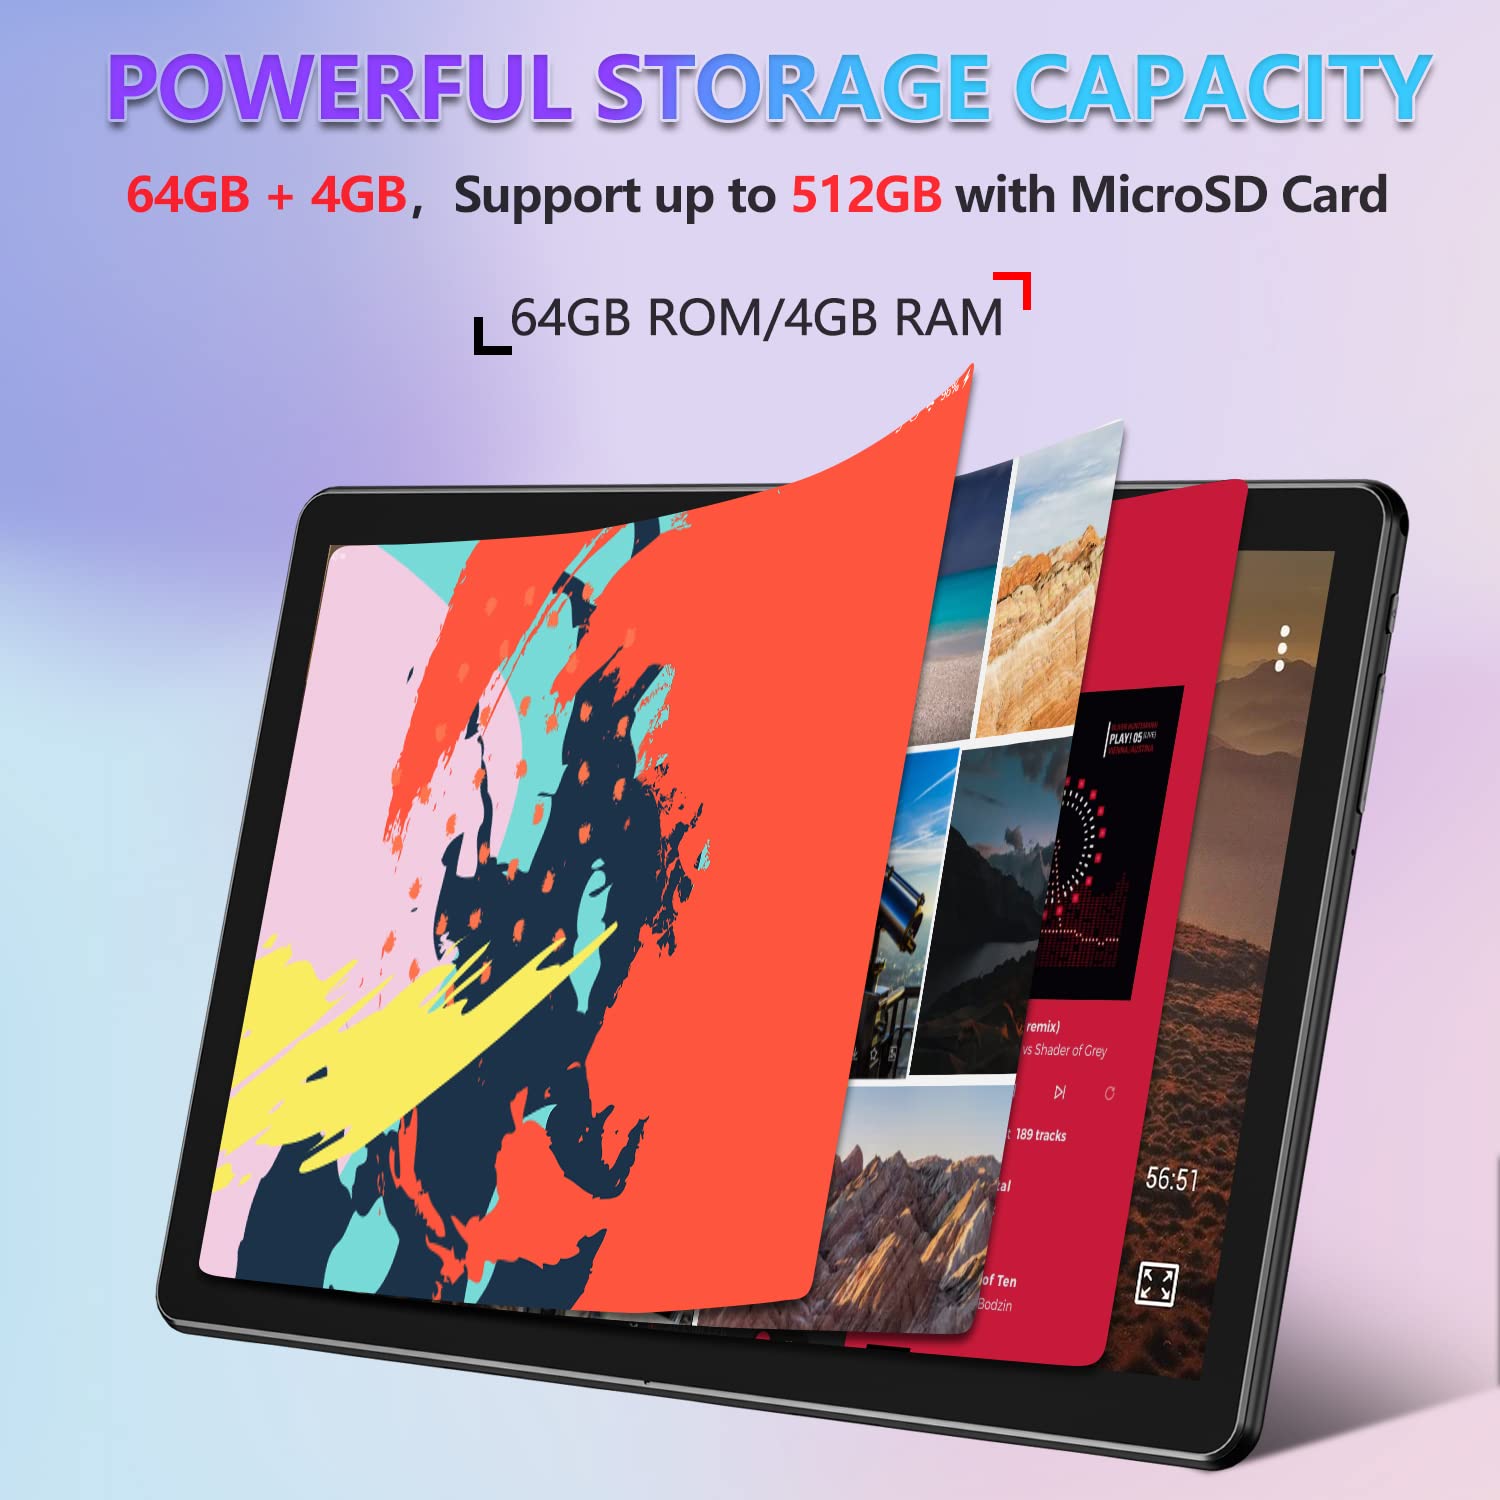 𝟮𝟬𝟮𝟒 𝗟𝐚𝐭𝐞𝐬𝐭 Tablet 10.1" Octa-Core Android 11 Tablet, 64GB Storage Tablet with Keyboard, Stylus Pen, Dual 13MP+5MP Camera, WiFi, Bluetooth, GPS, 512GB Expand Support, IPS Full HD Display